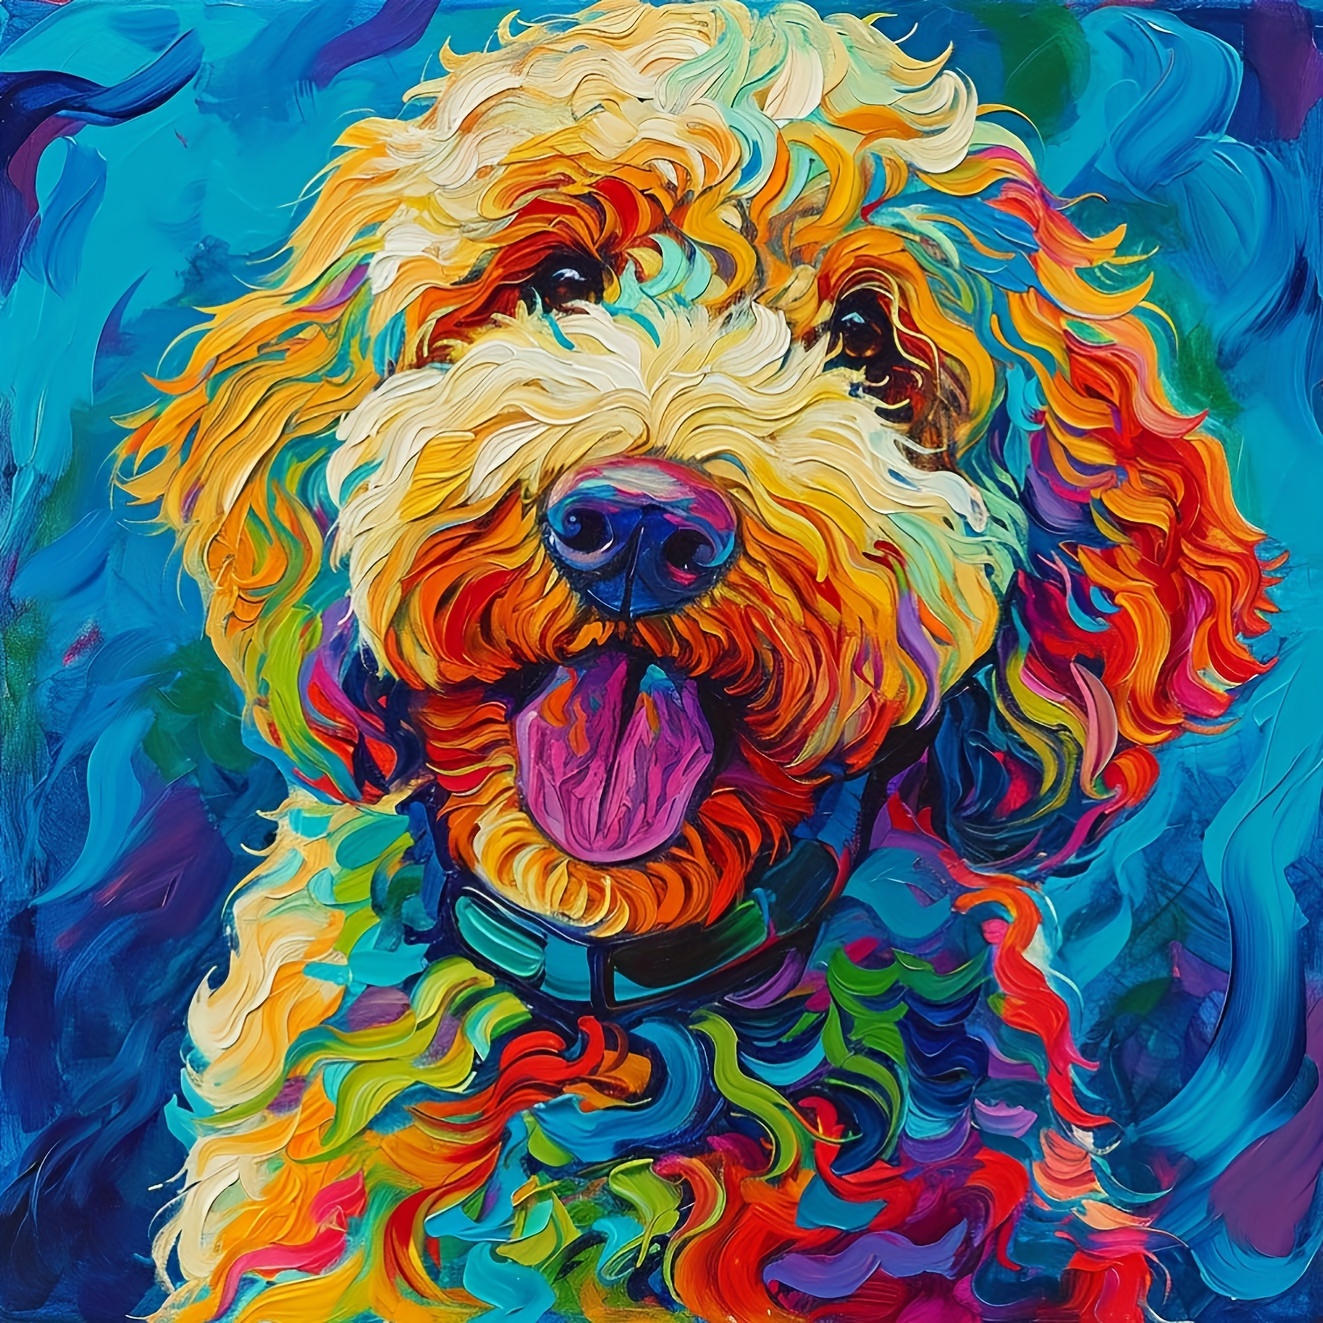 

1pc Large Size 40x40cm/15.7x15.7in Without Frame Diy 5d Artificial Diamond Art Painting Happy Dog, Full Rhinestone Painting, Diamond Art Embroidery Kits, Handmade Home Room Office Wall Decor